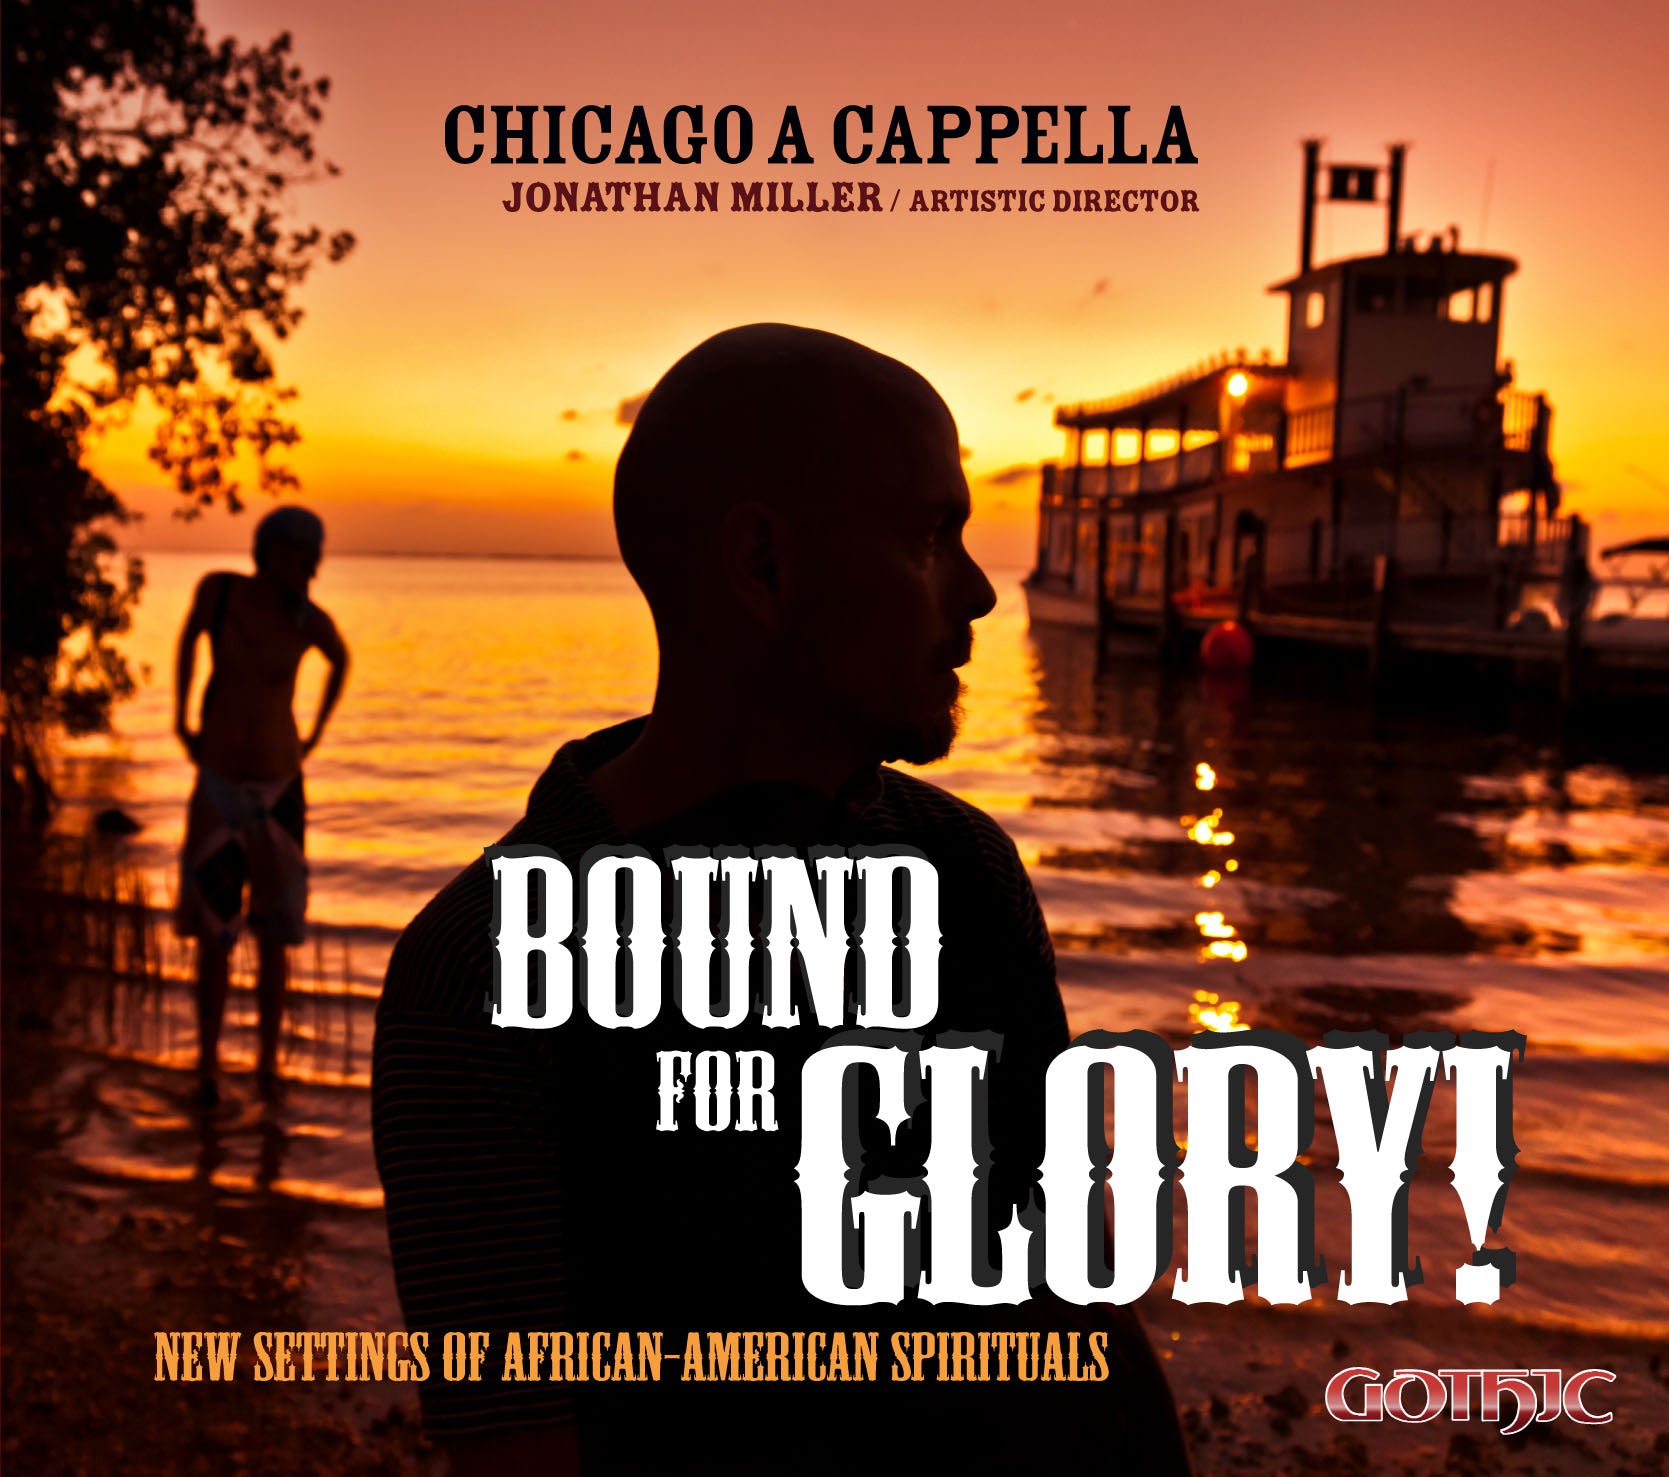 Bound For Glory! New Settings of African-American Spirituals